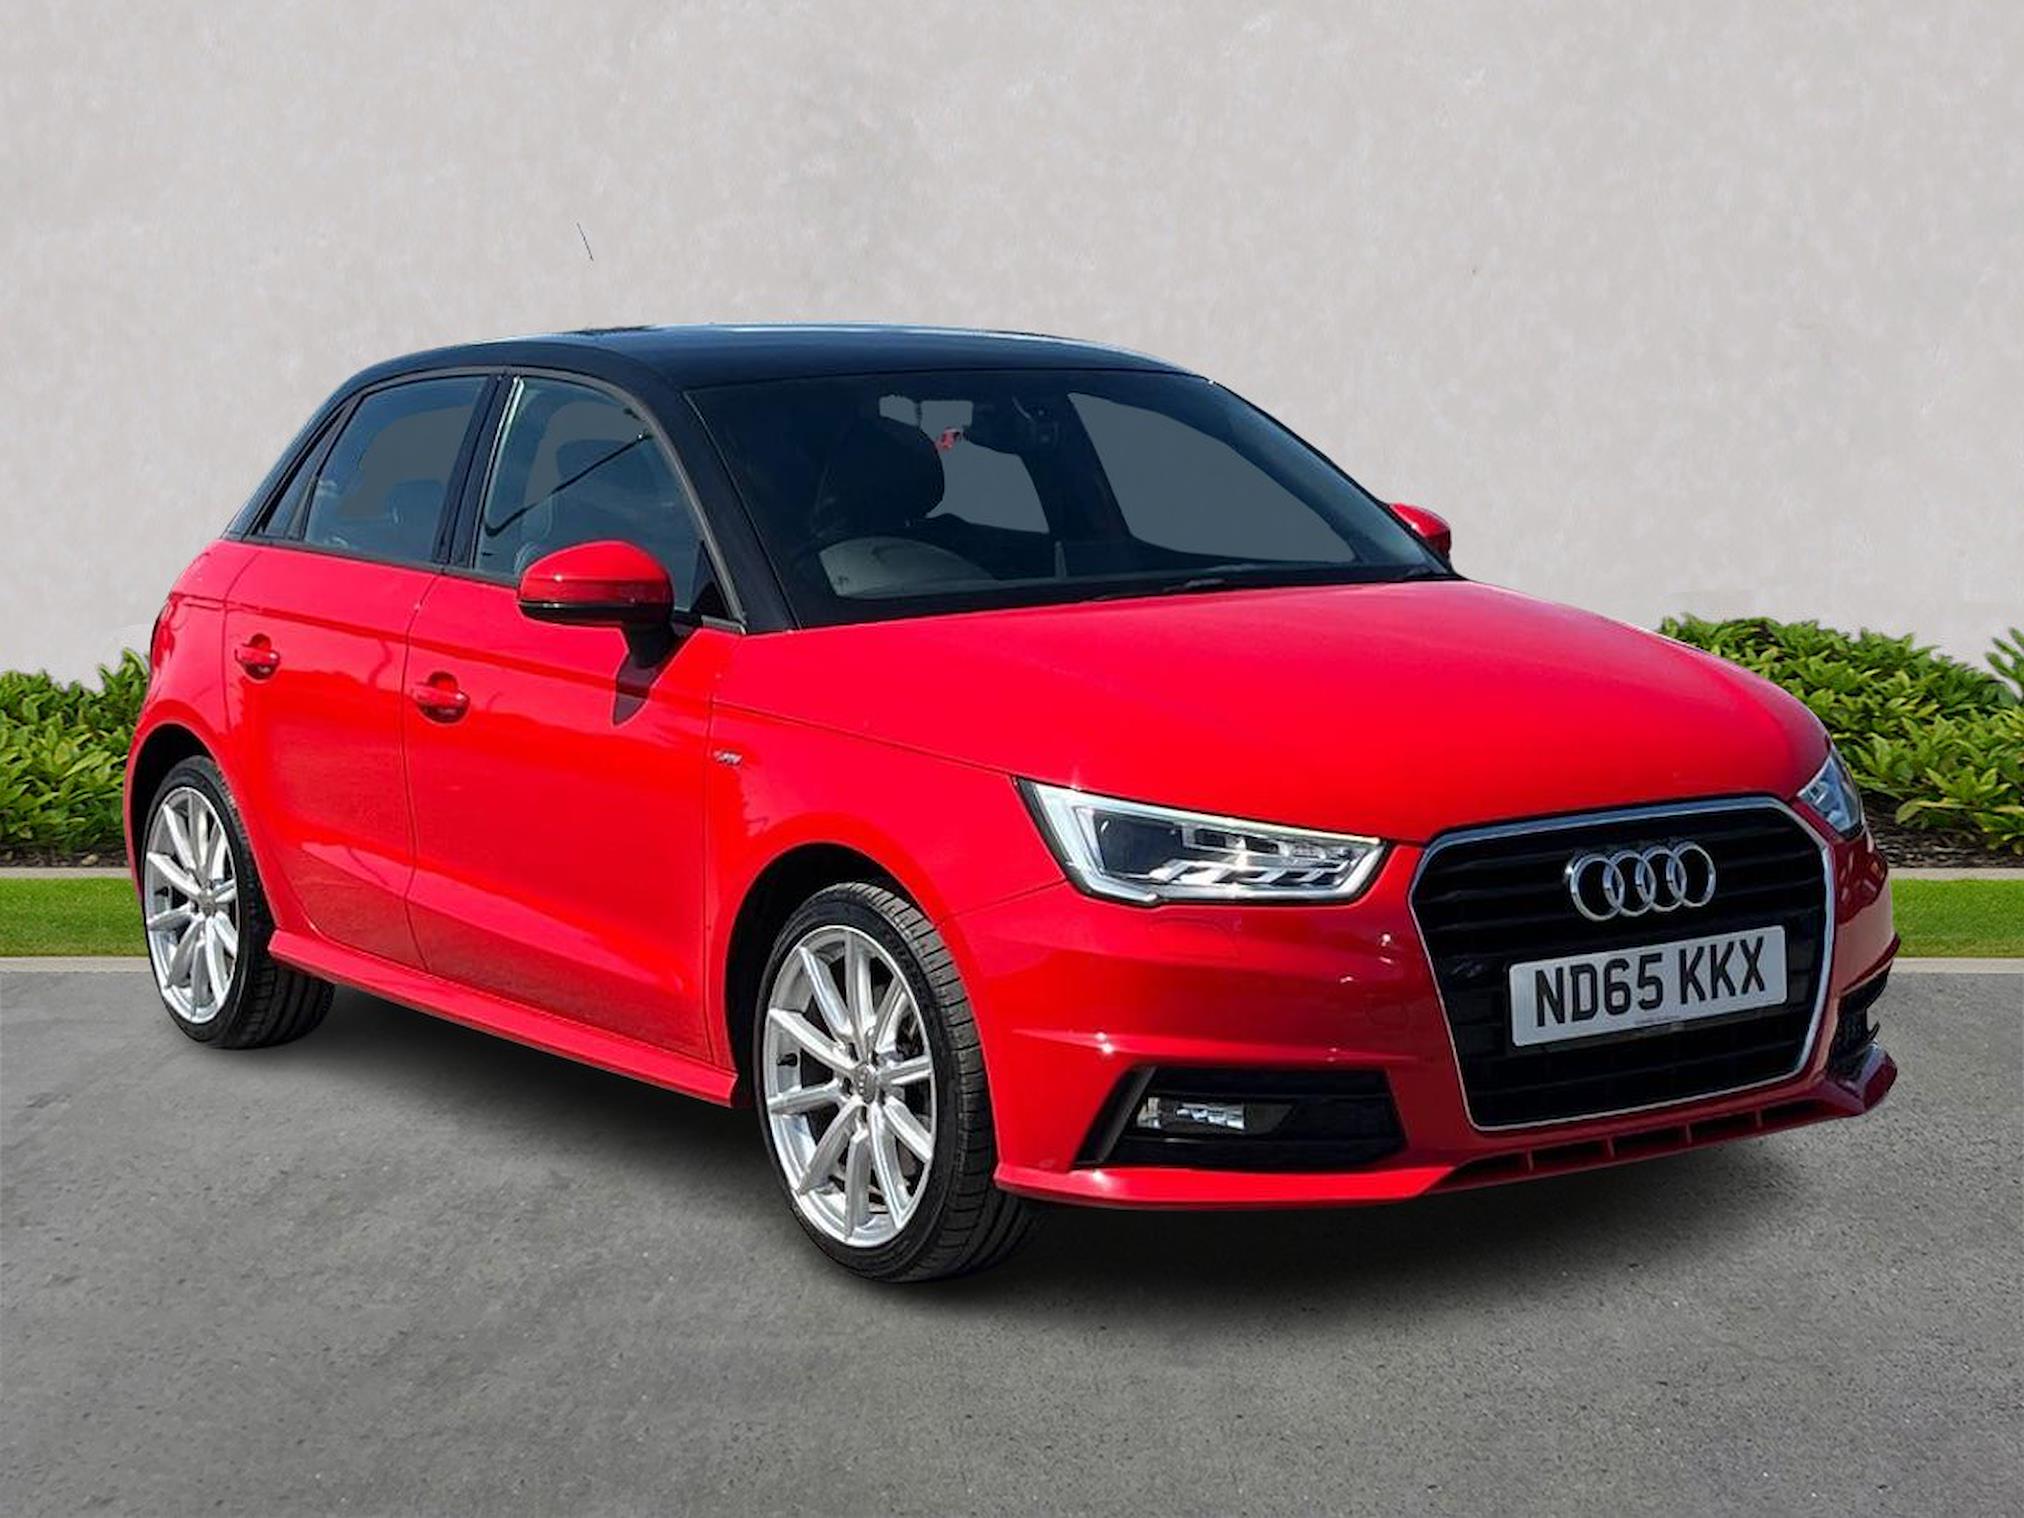 Used AUDI A1 1.4 Tfsi 150 S Line 5Dr 2015